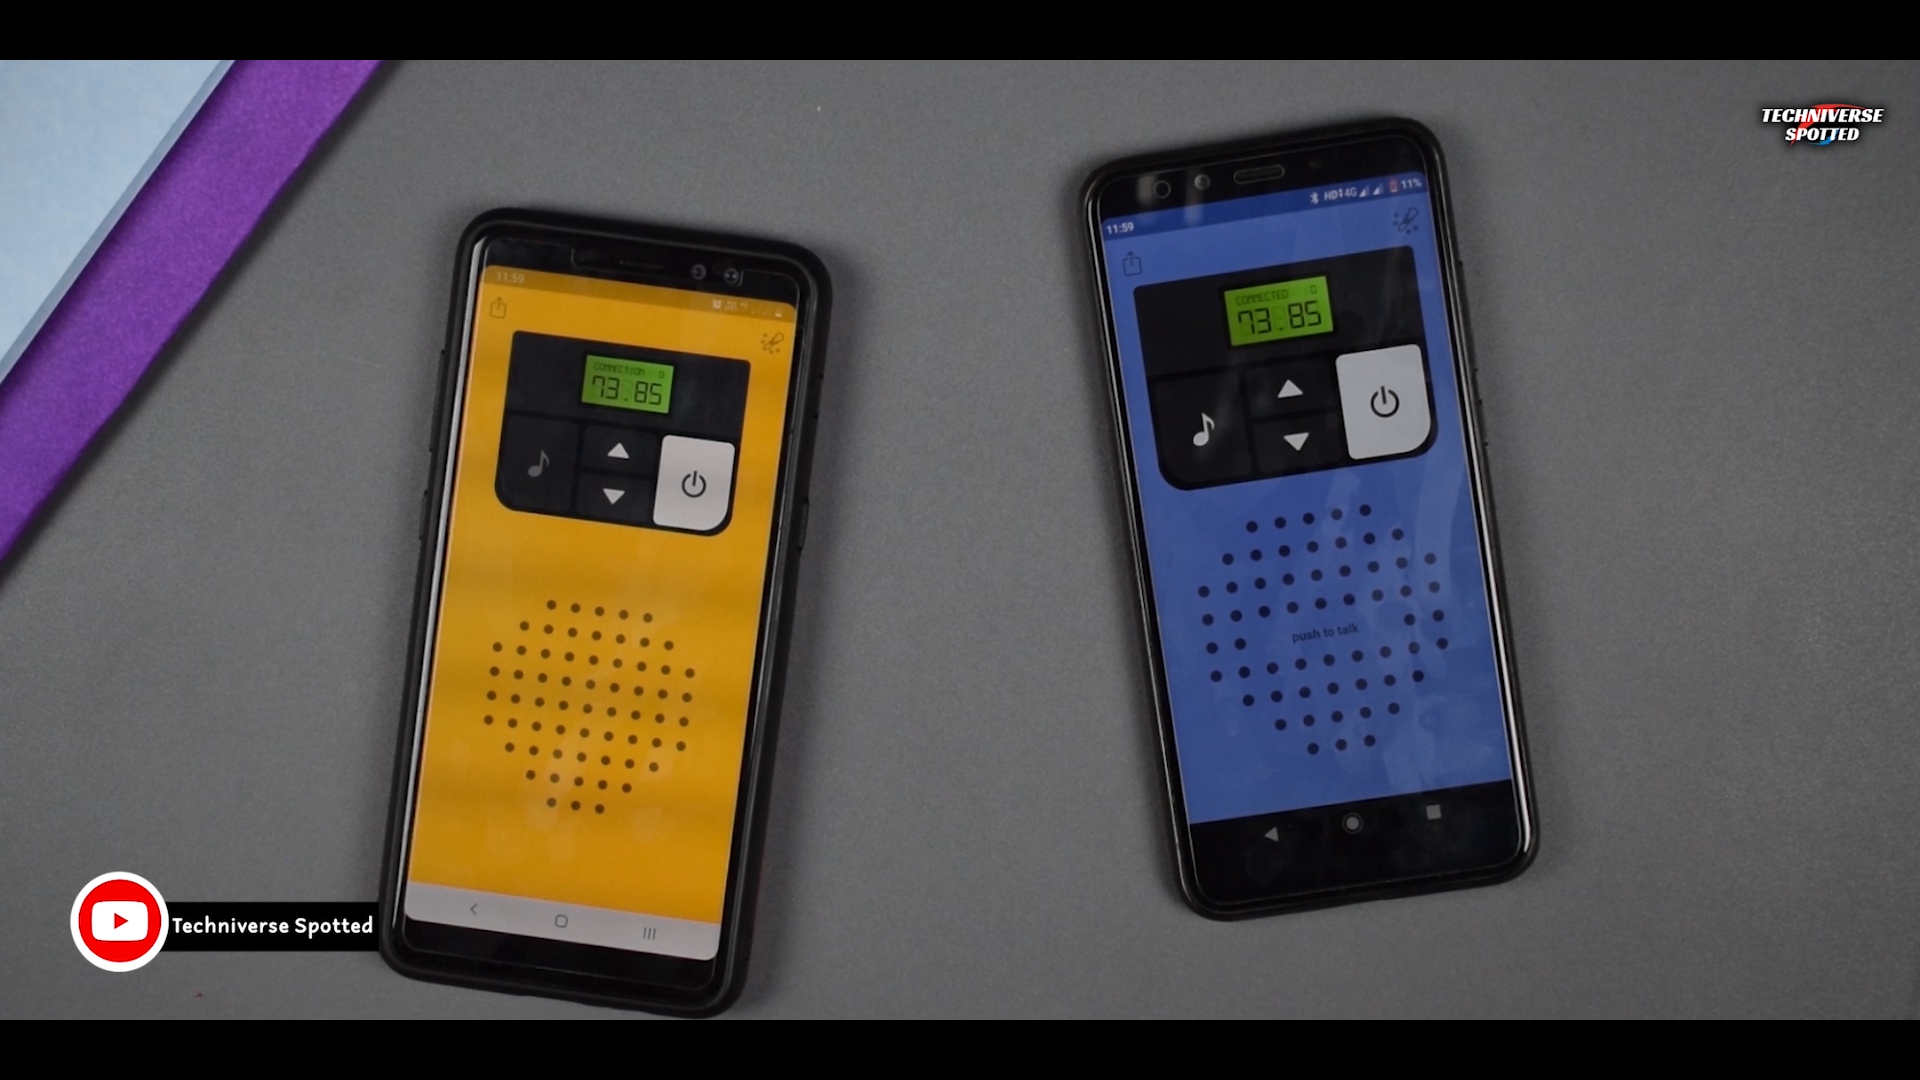 This App Makes Walkie-Talkie Communication Easy.